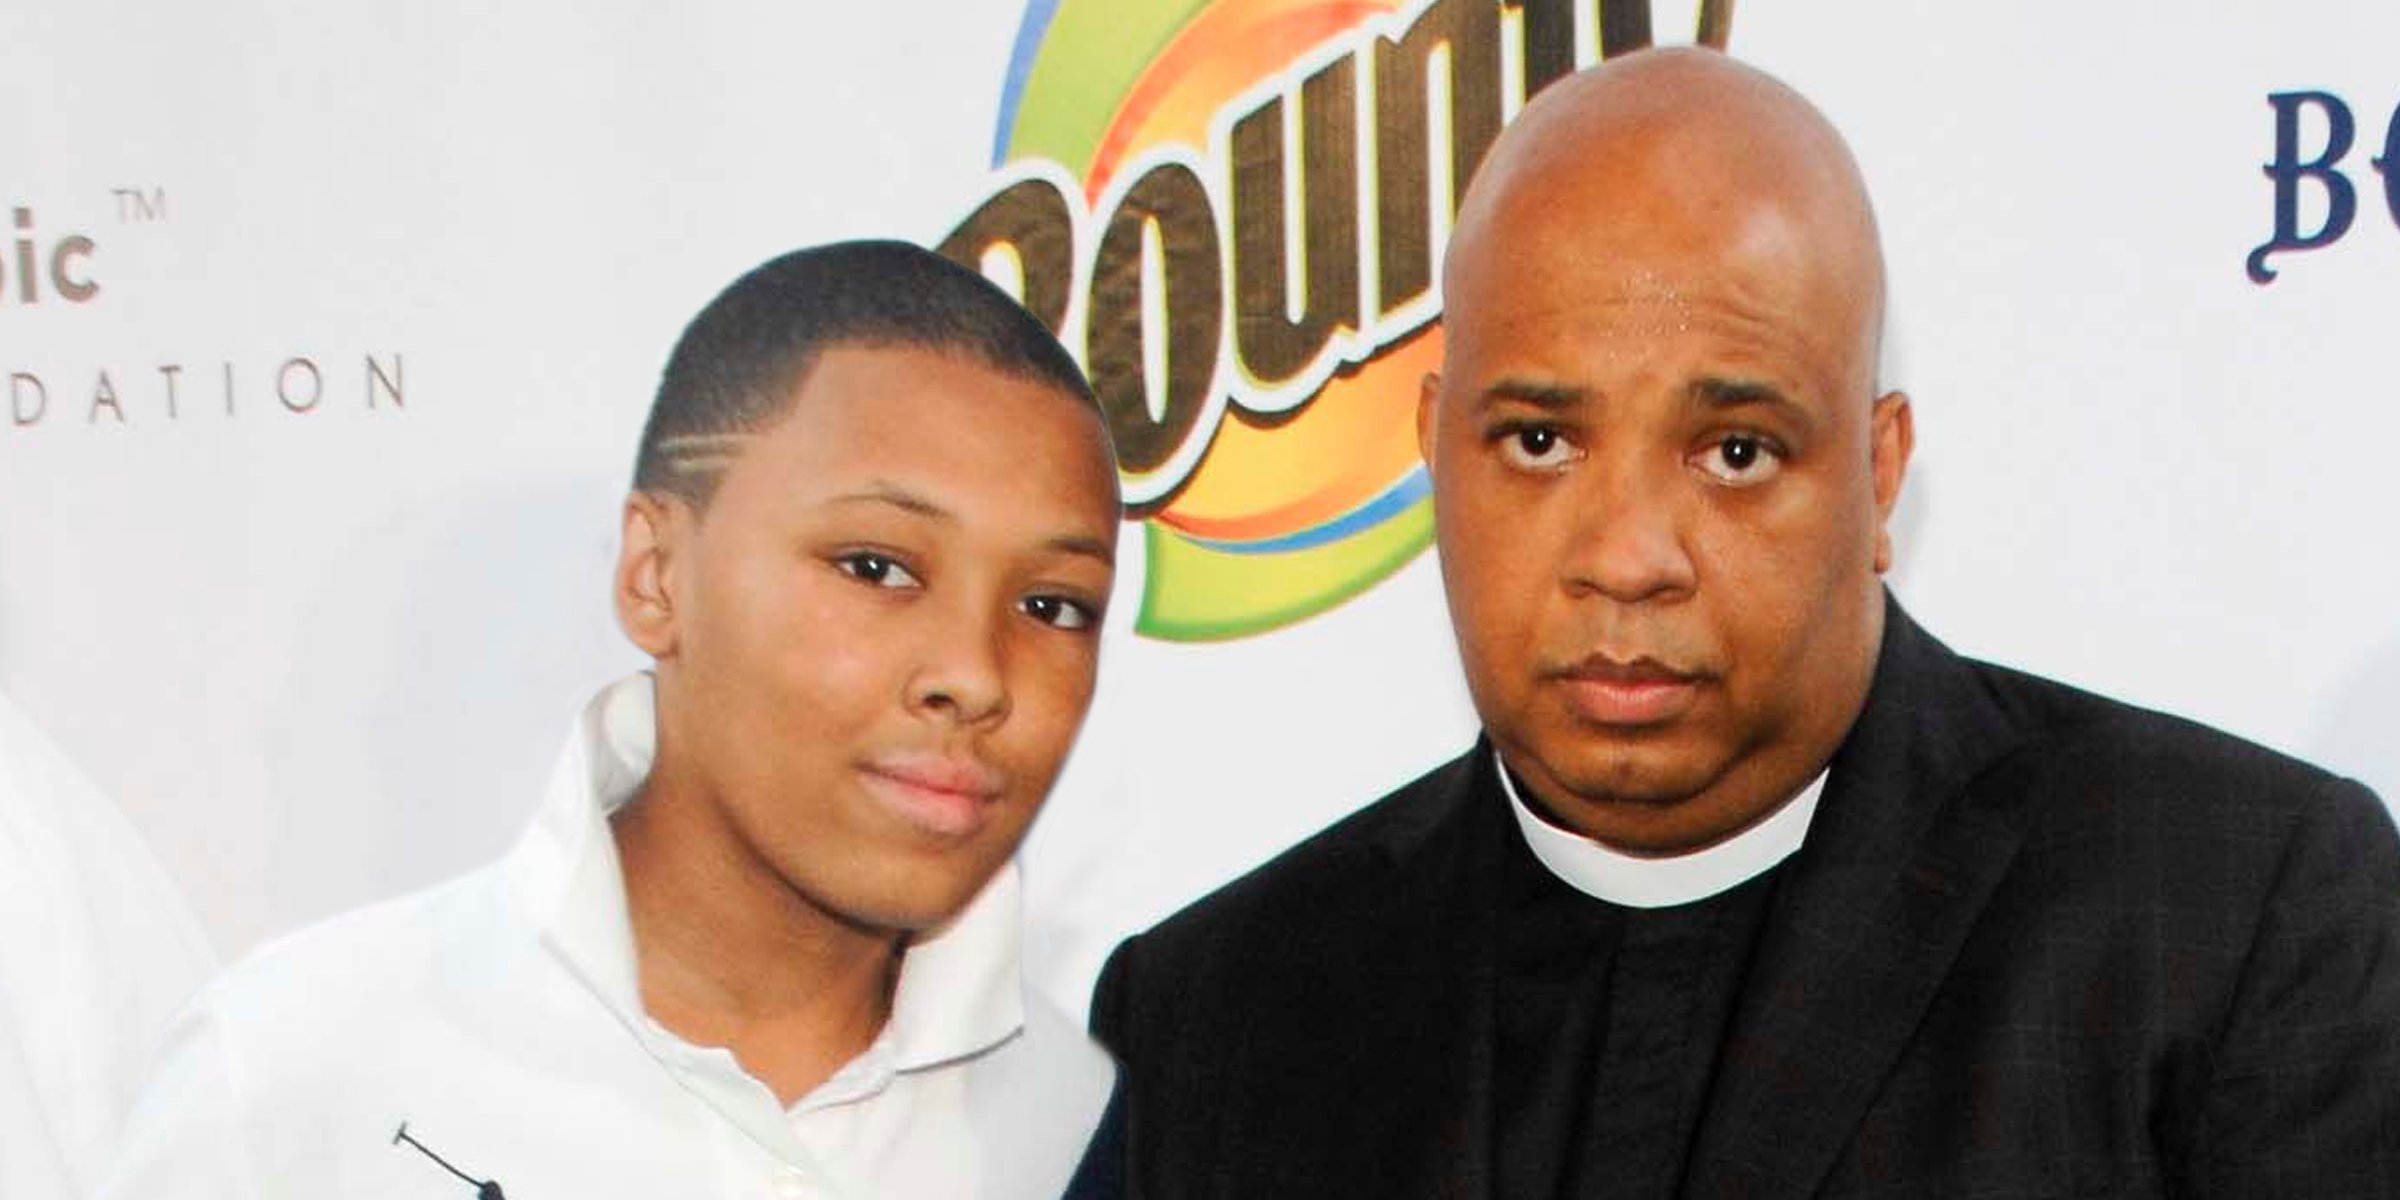 Russell Simmons II and Joseph 'Reverend Run' Simmons | Source: Getty Images